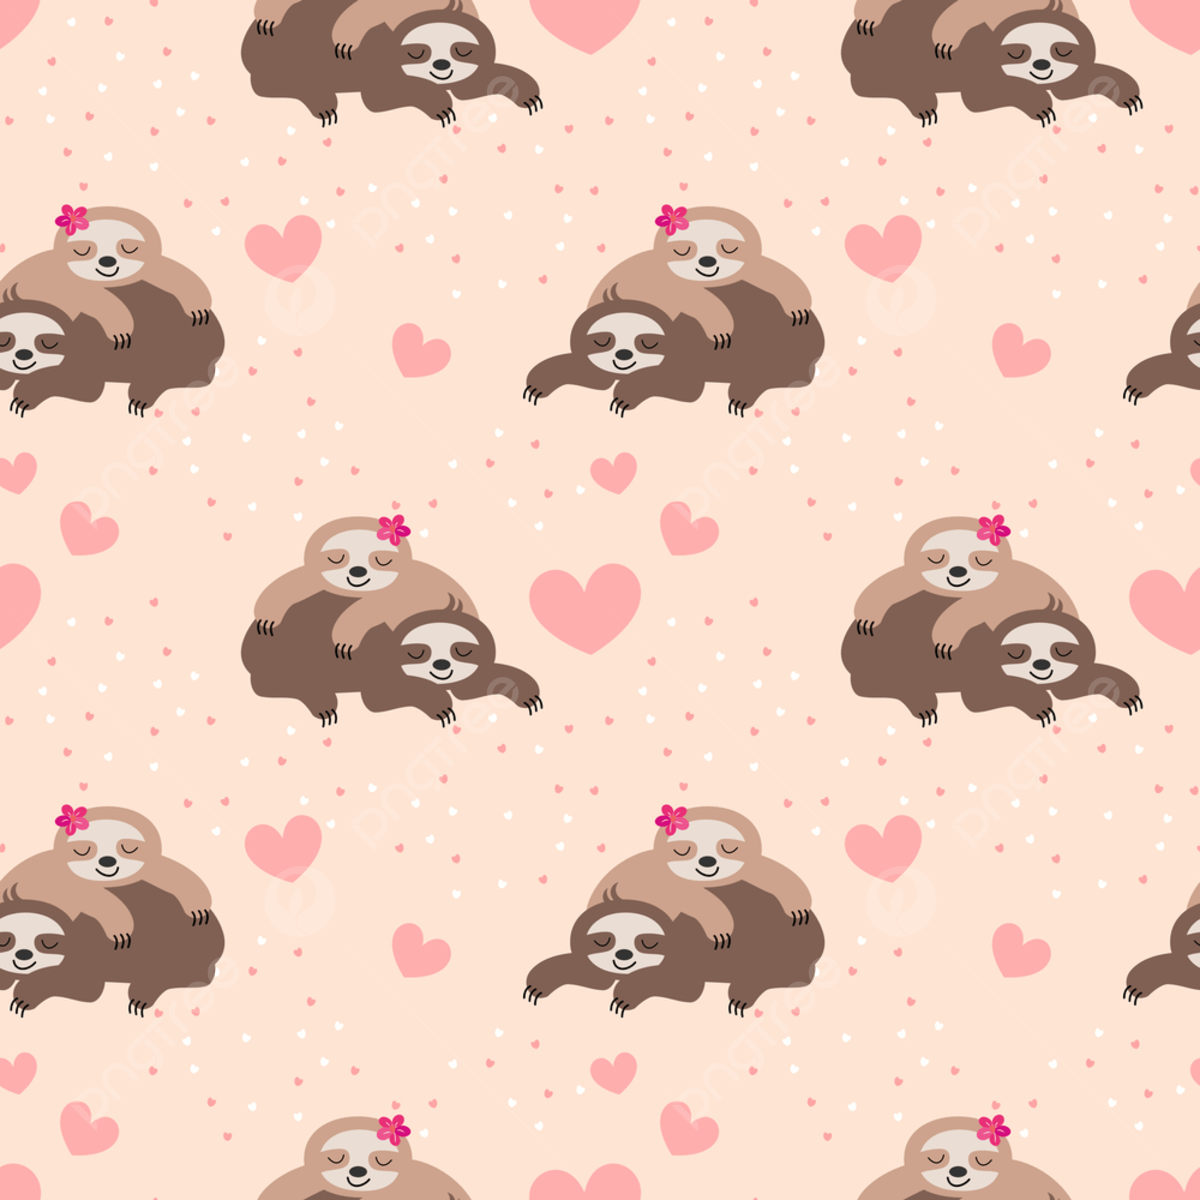 A pattern of sloths hugging and pink hearts on a pink background - Sloth